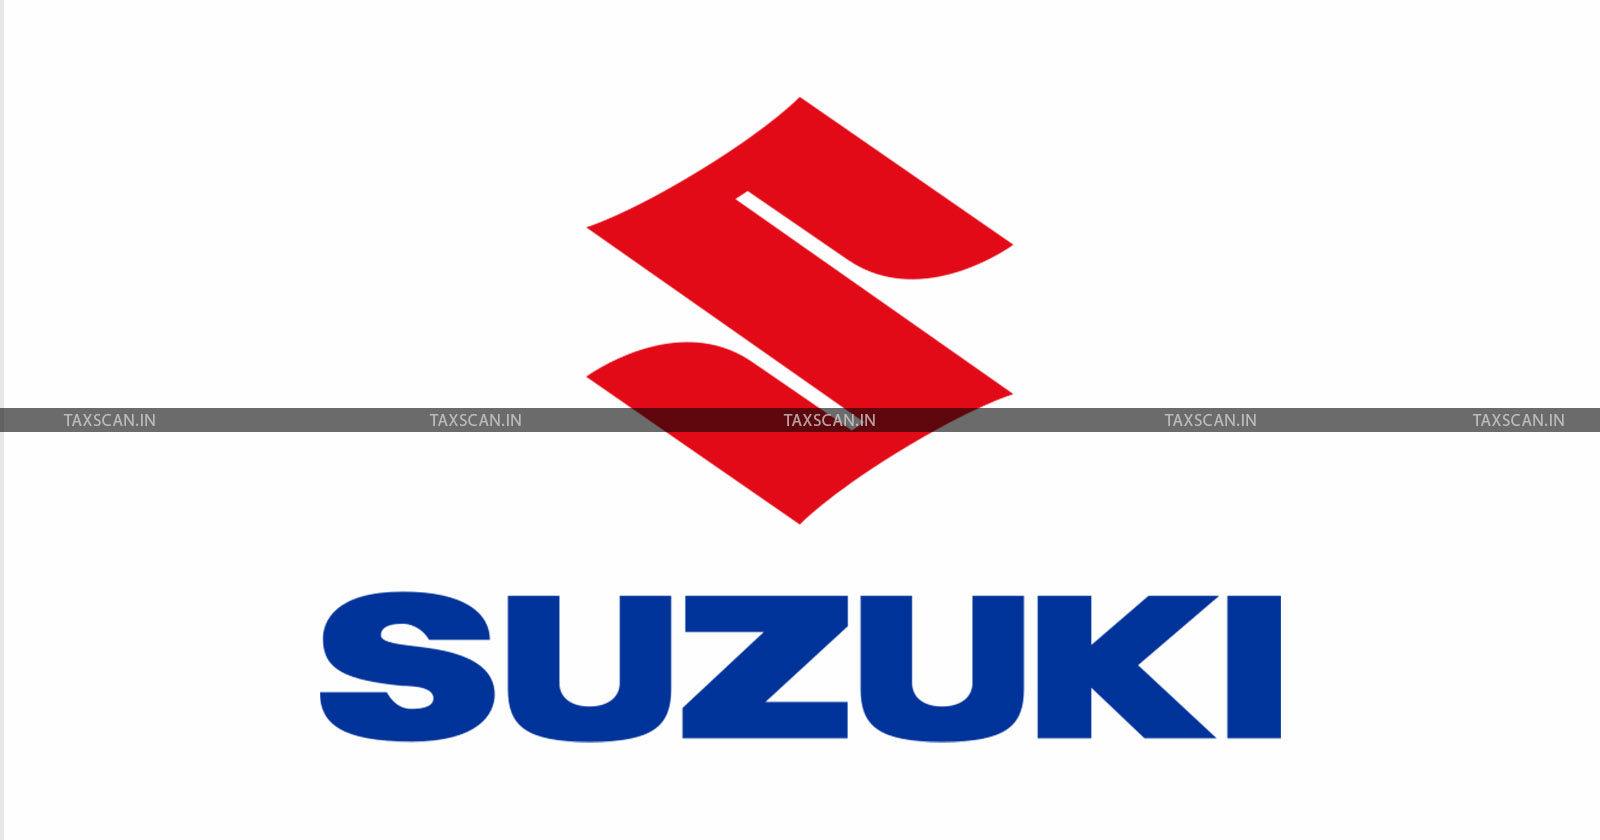 Excise - Service Tax Appellate Tribunal - Sales Service - PDI exemption - Excise Duty - Relief to Suzuki Motor - TAXSCAN